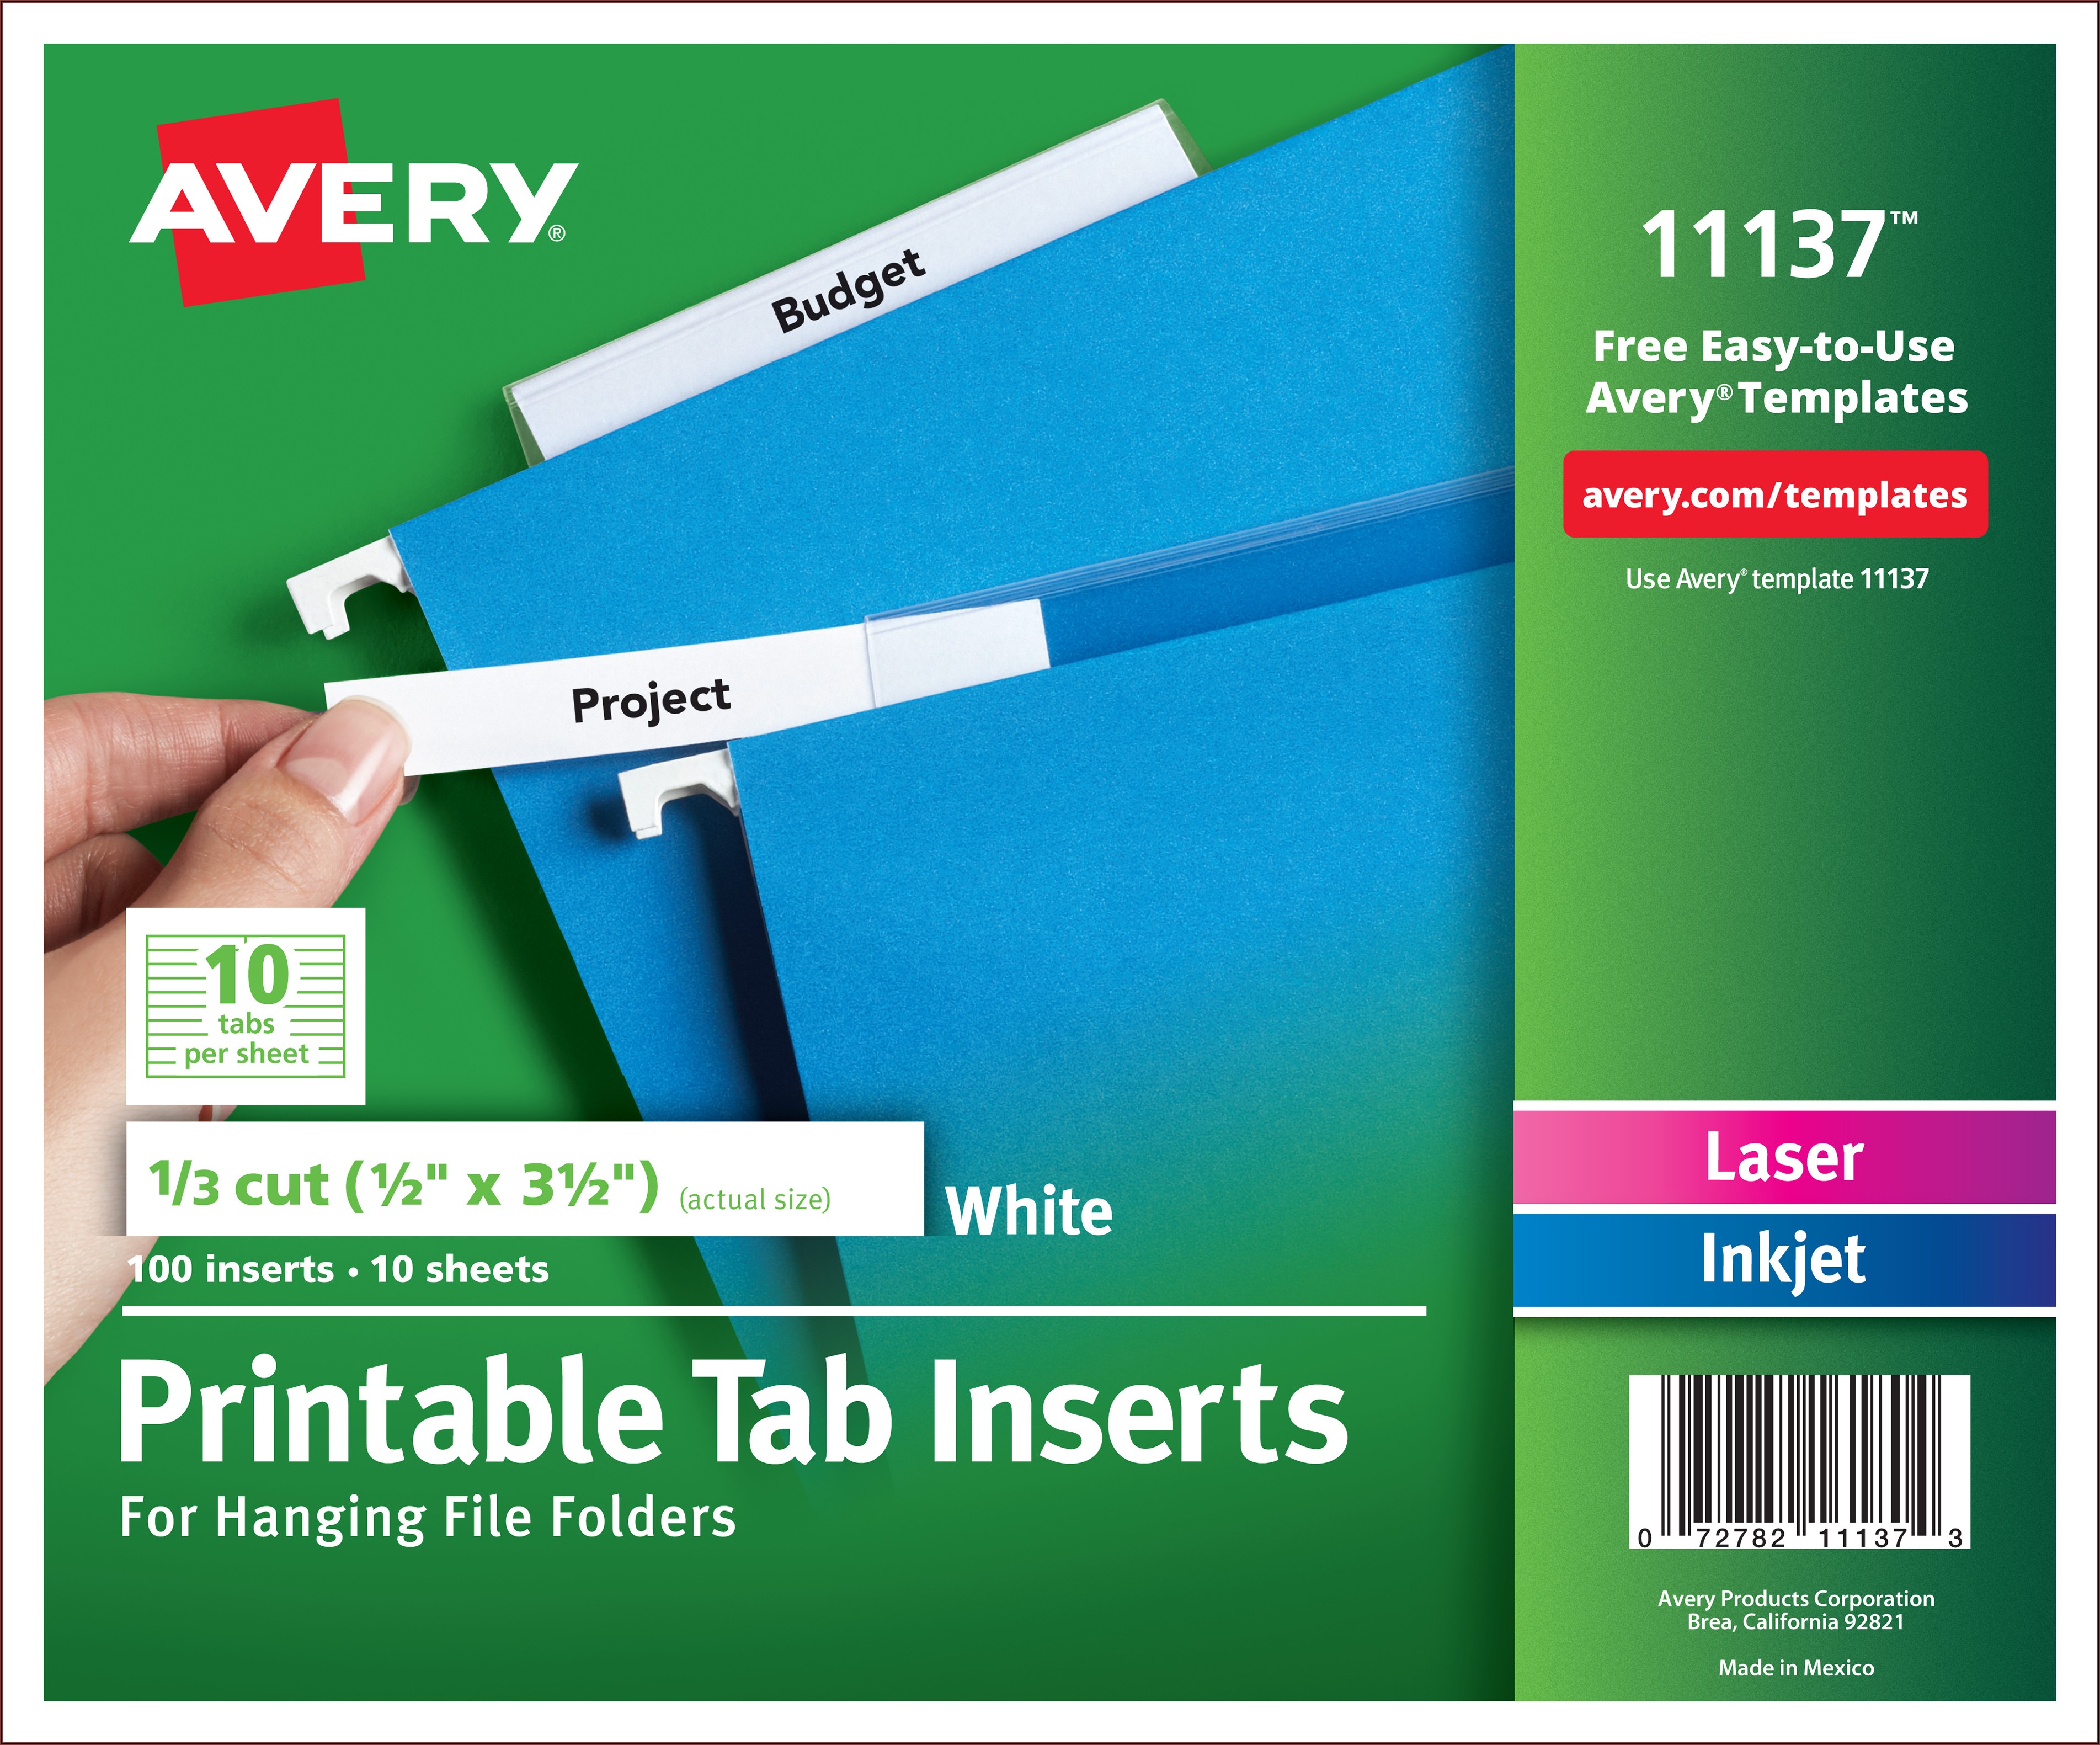 How To Print Avery Template 11136